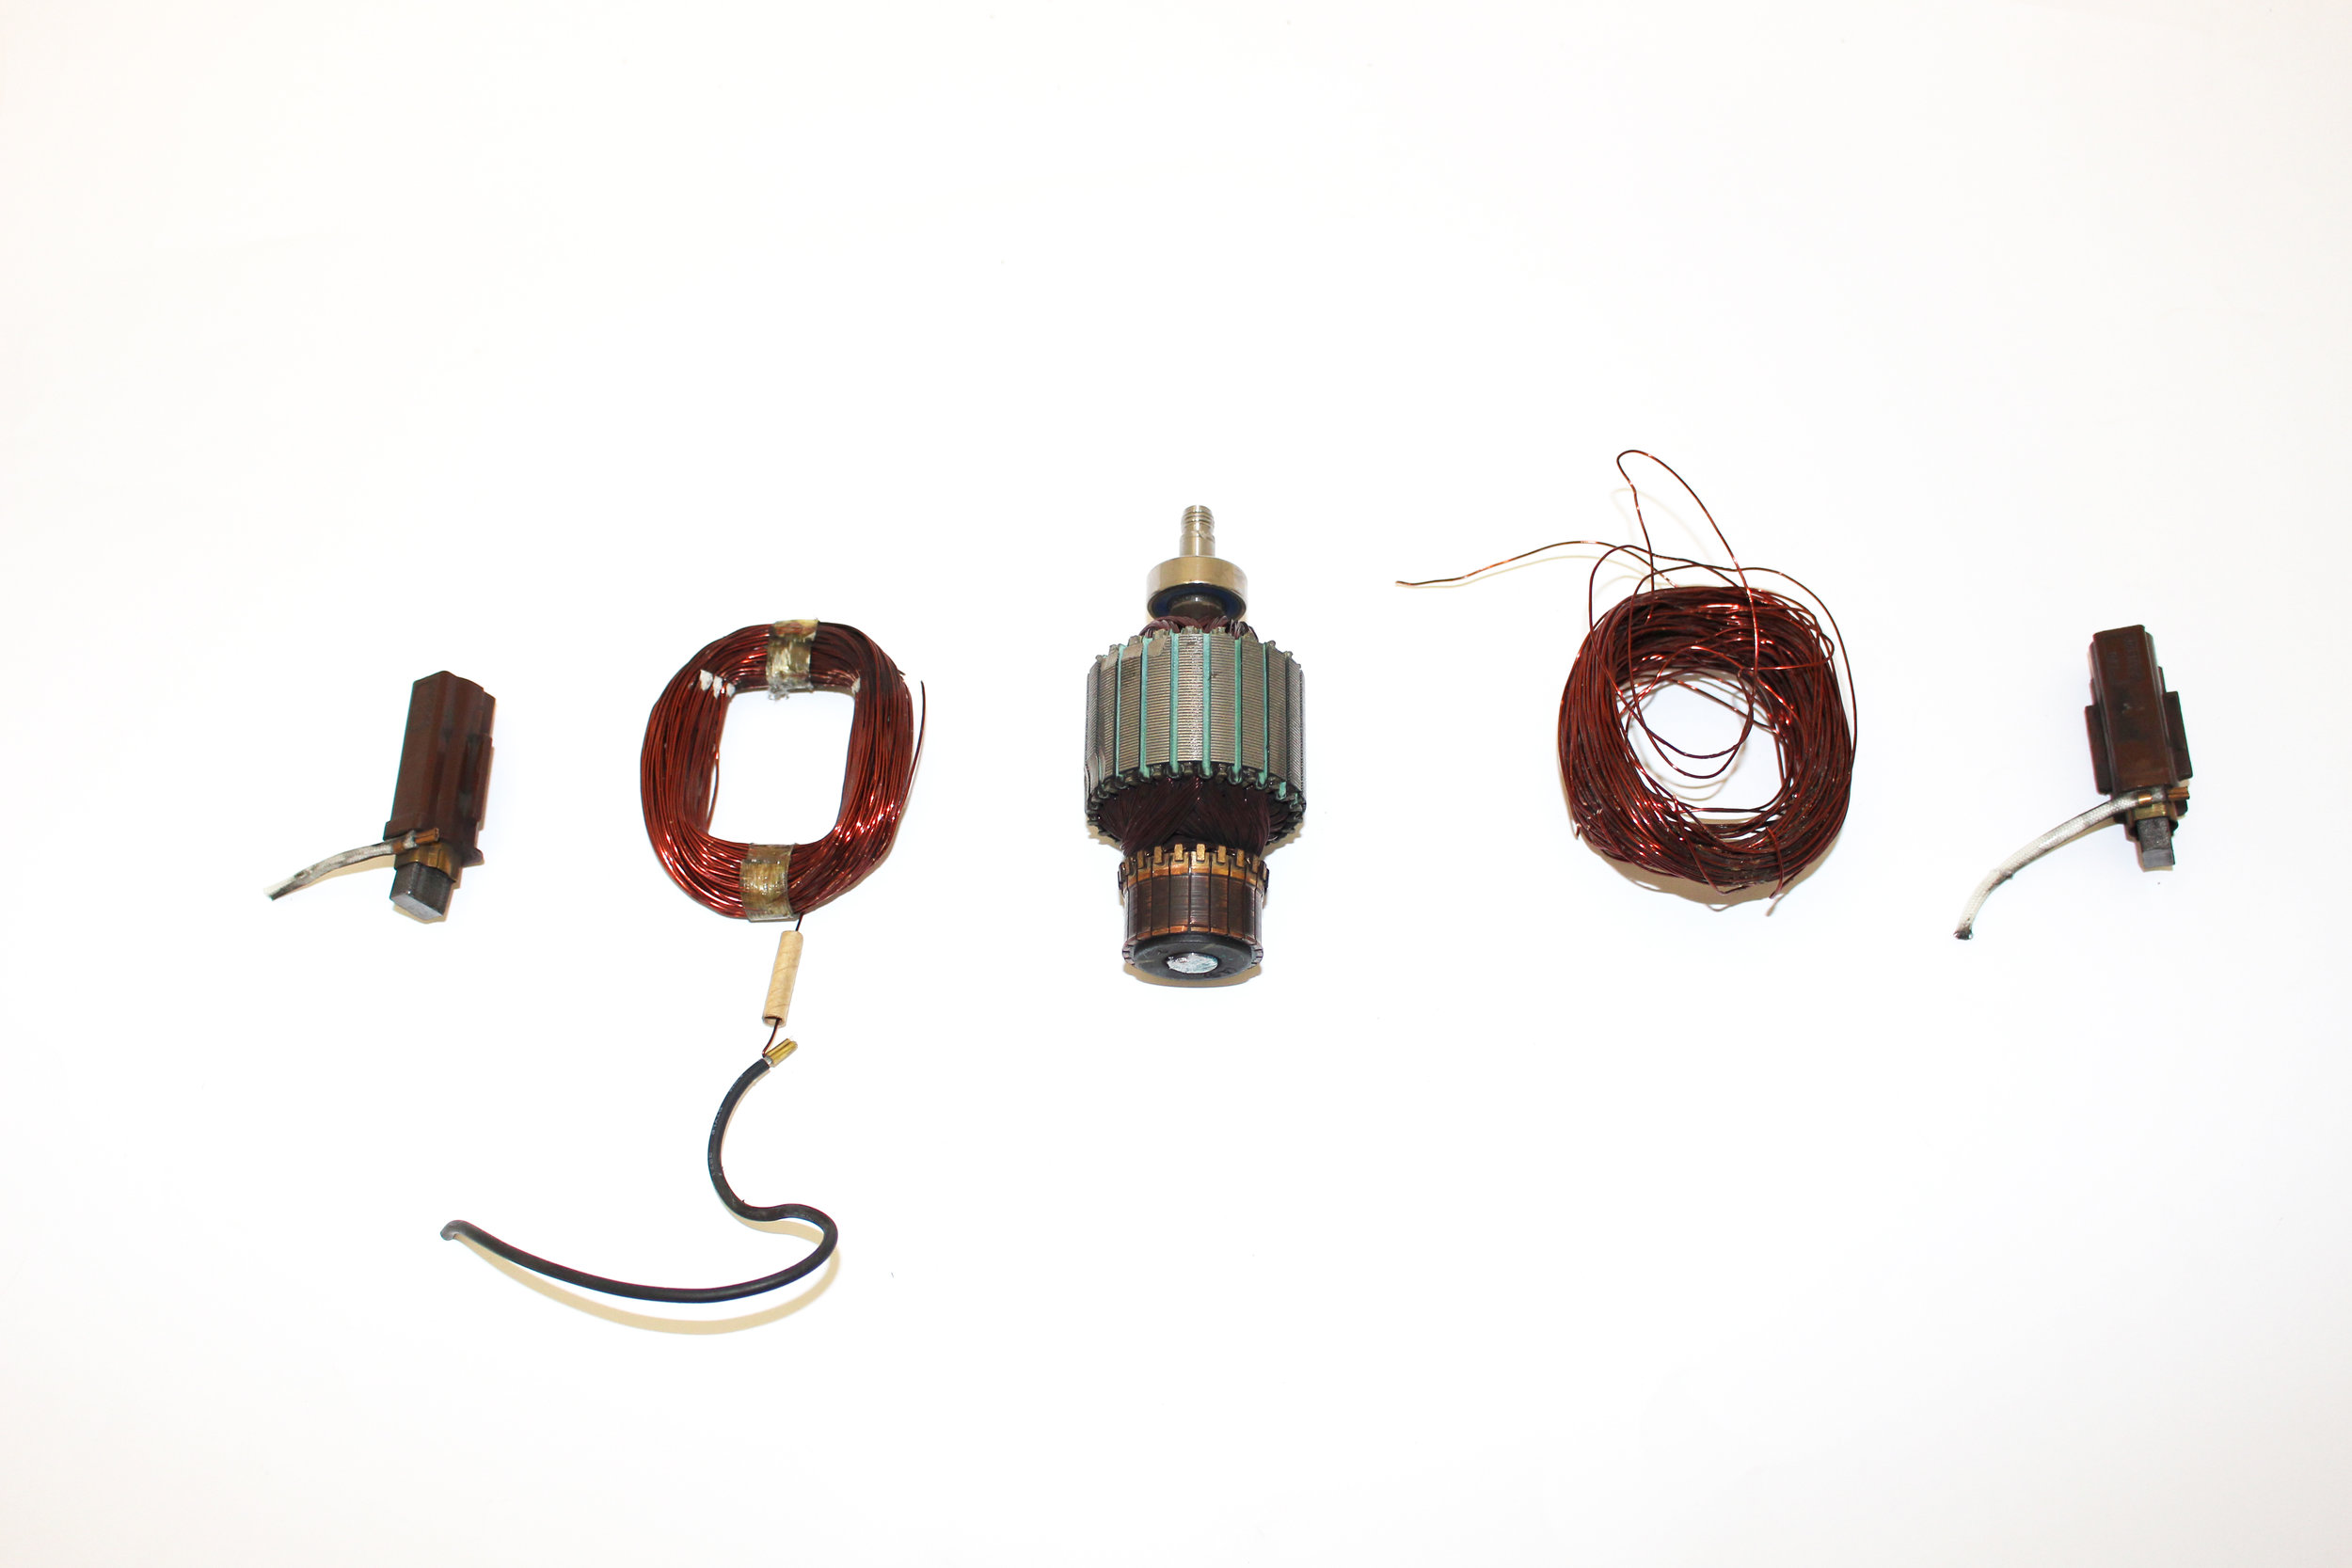  Disassembled Electric Motor 